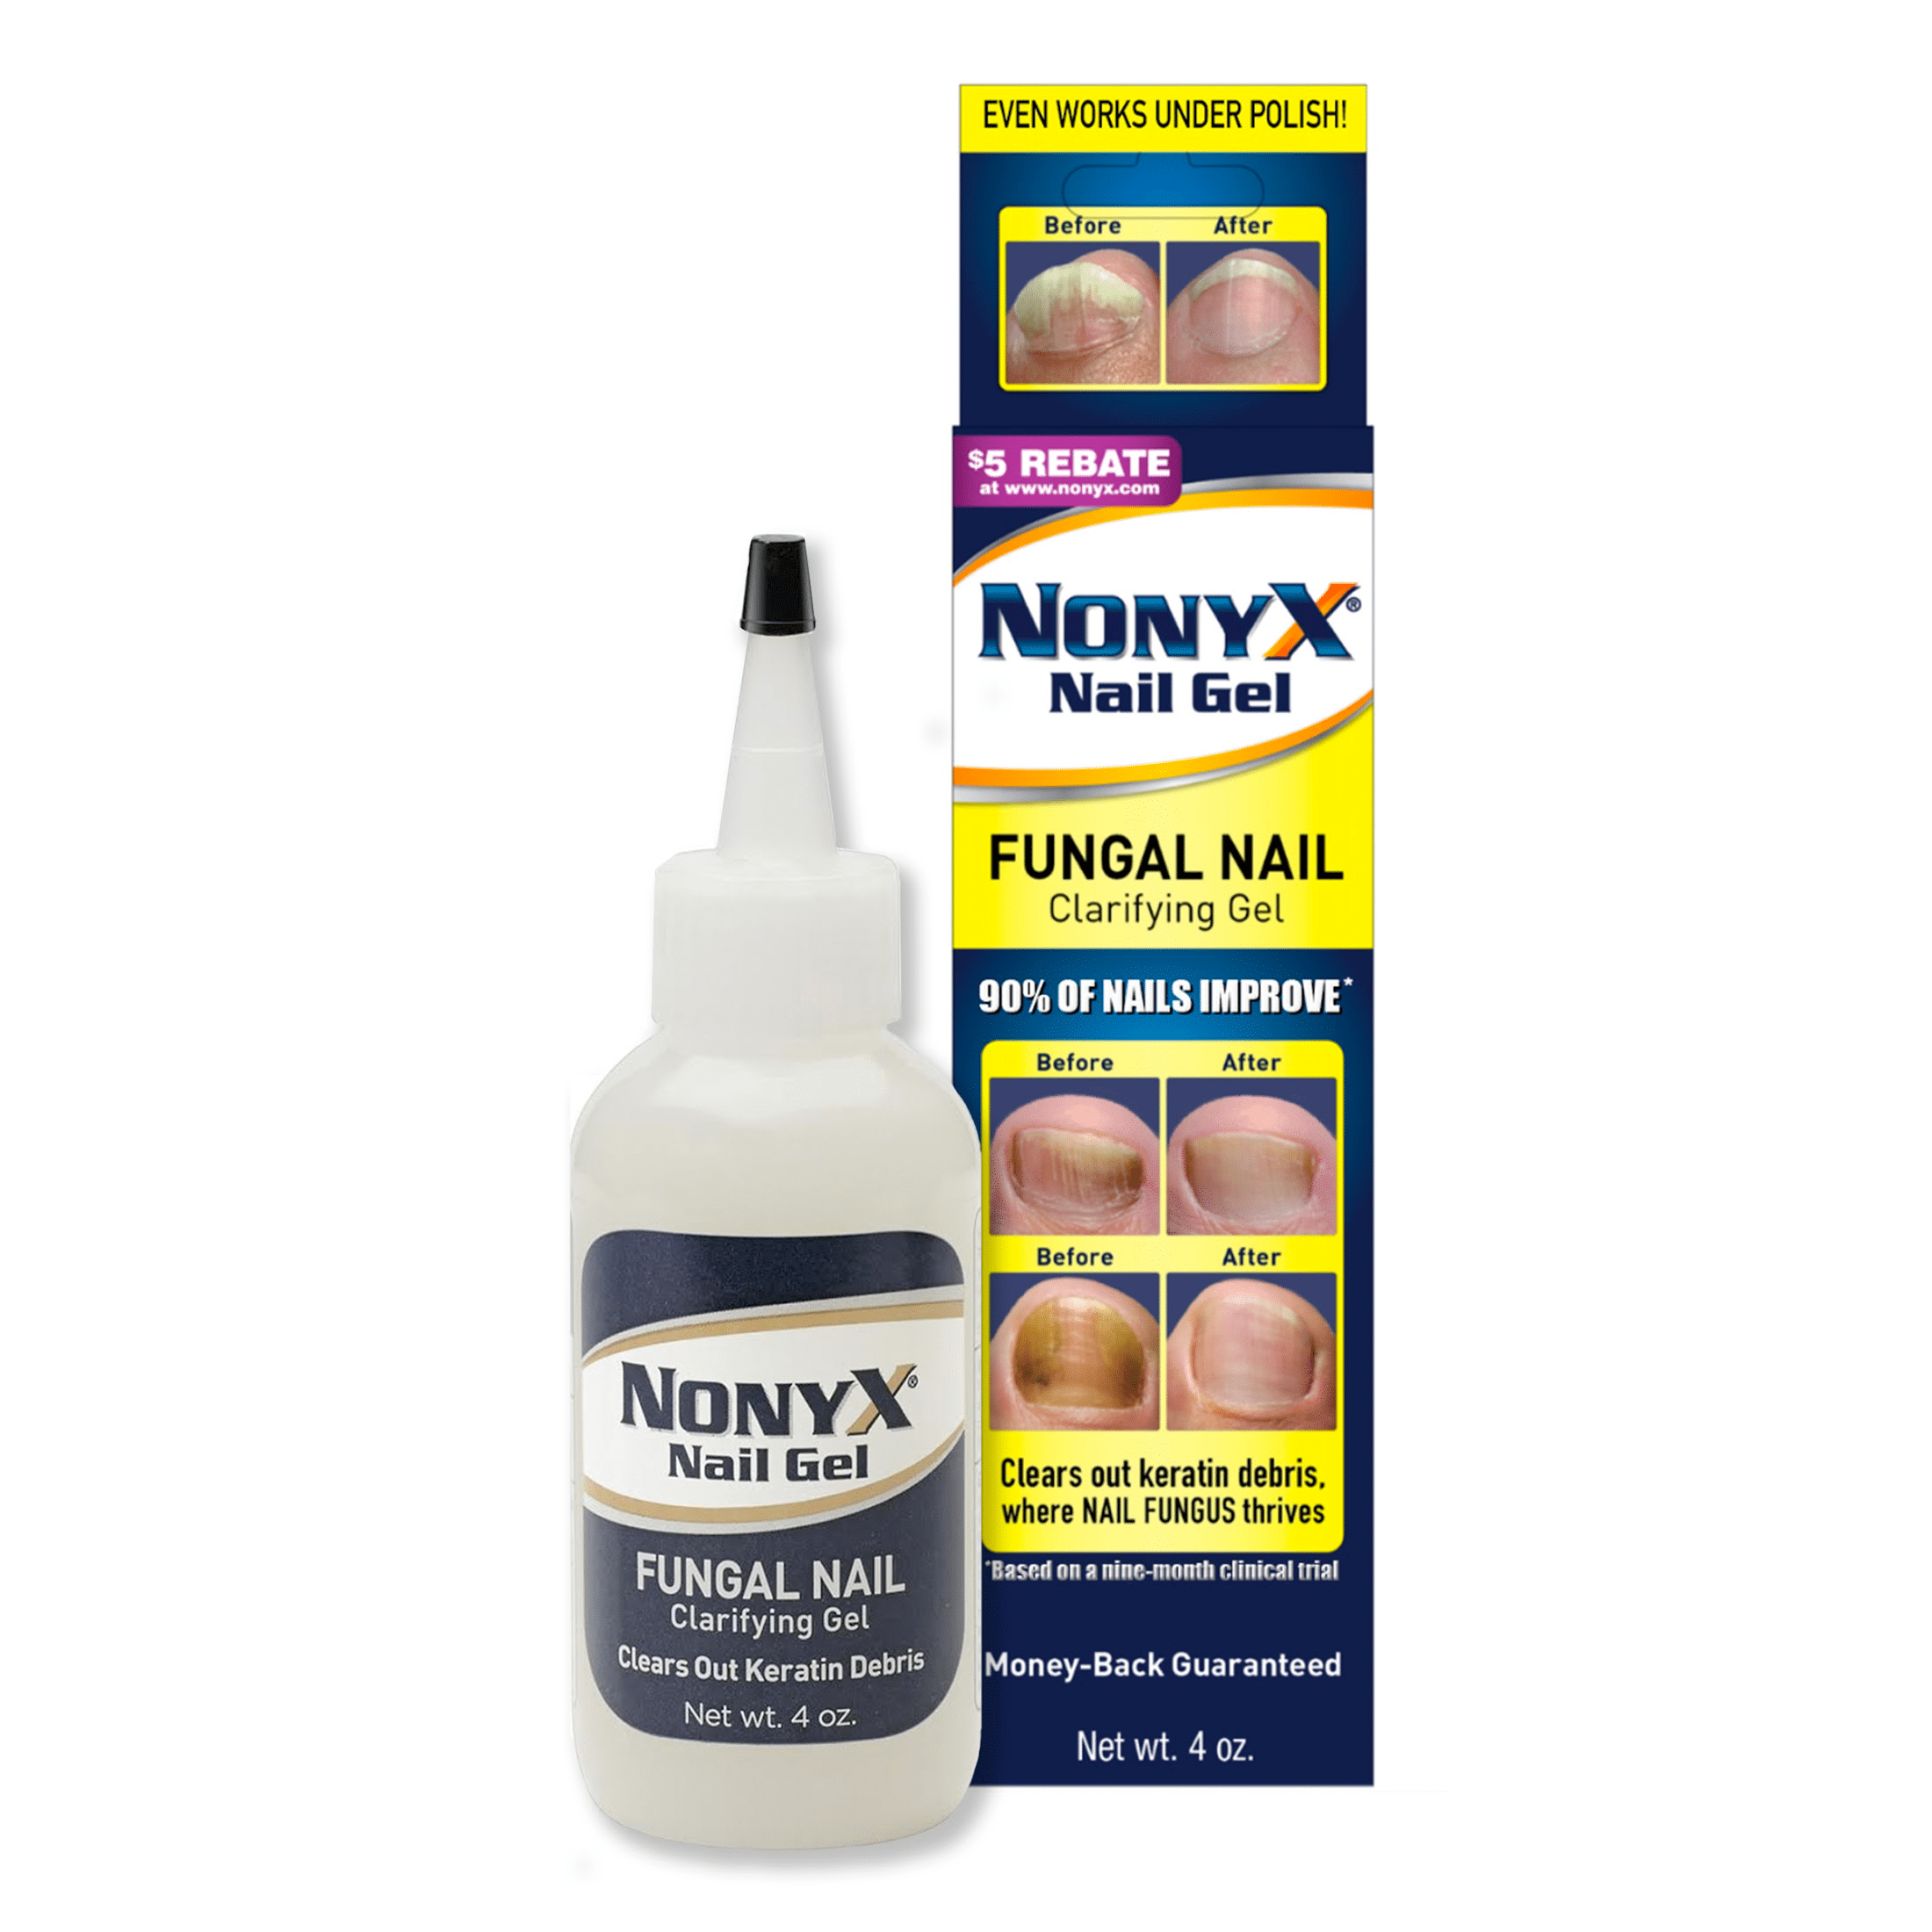 nonyx-fungal-nail-clarifying-gel-clears-out-keratin-debris-where-nail